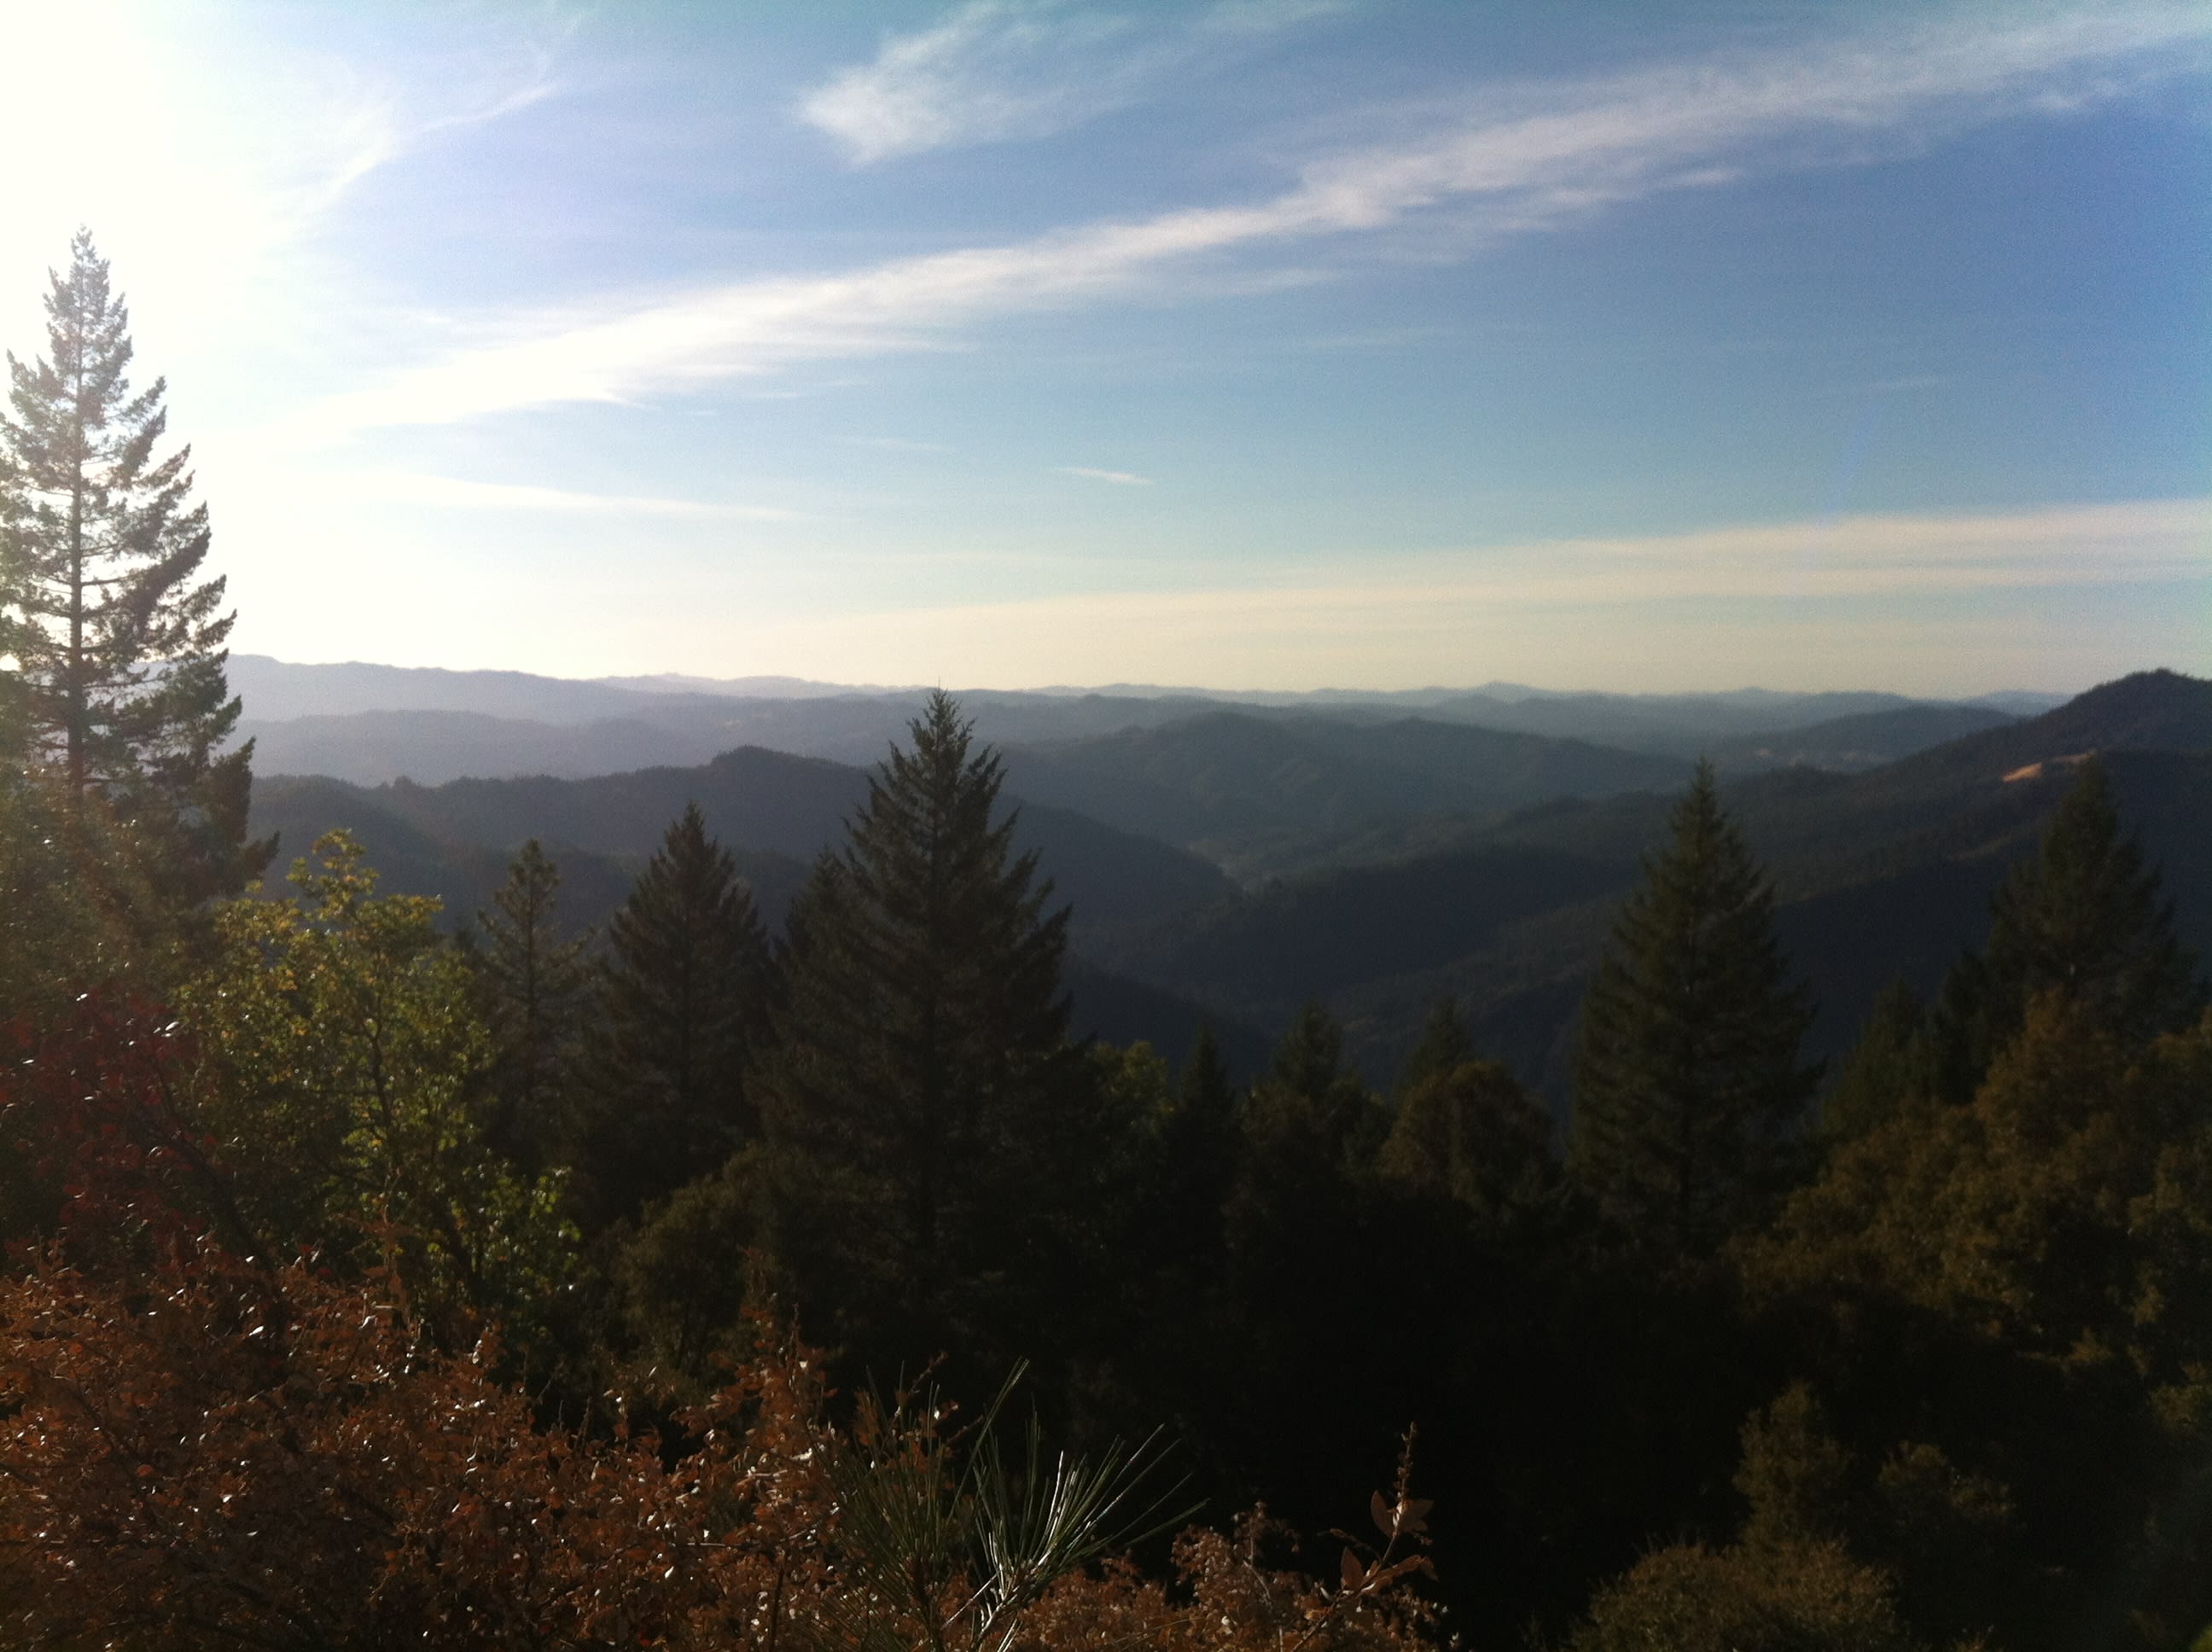 Mendocino National Forest